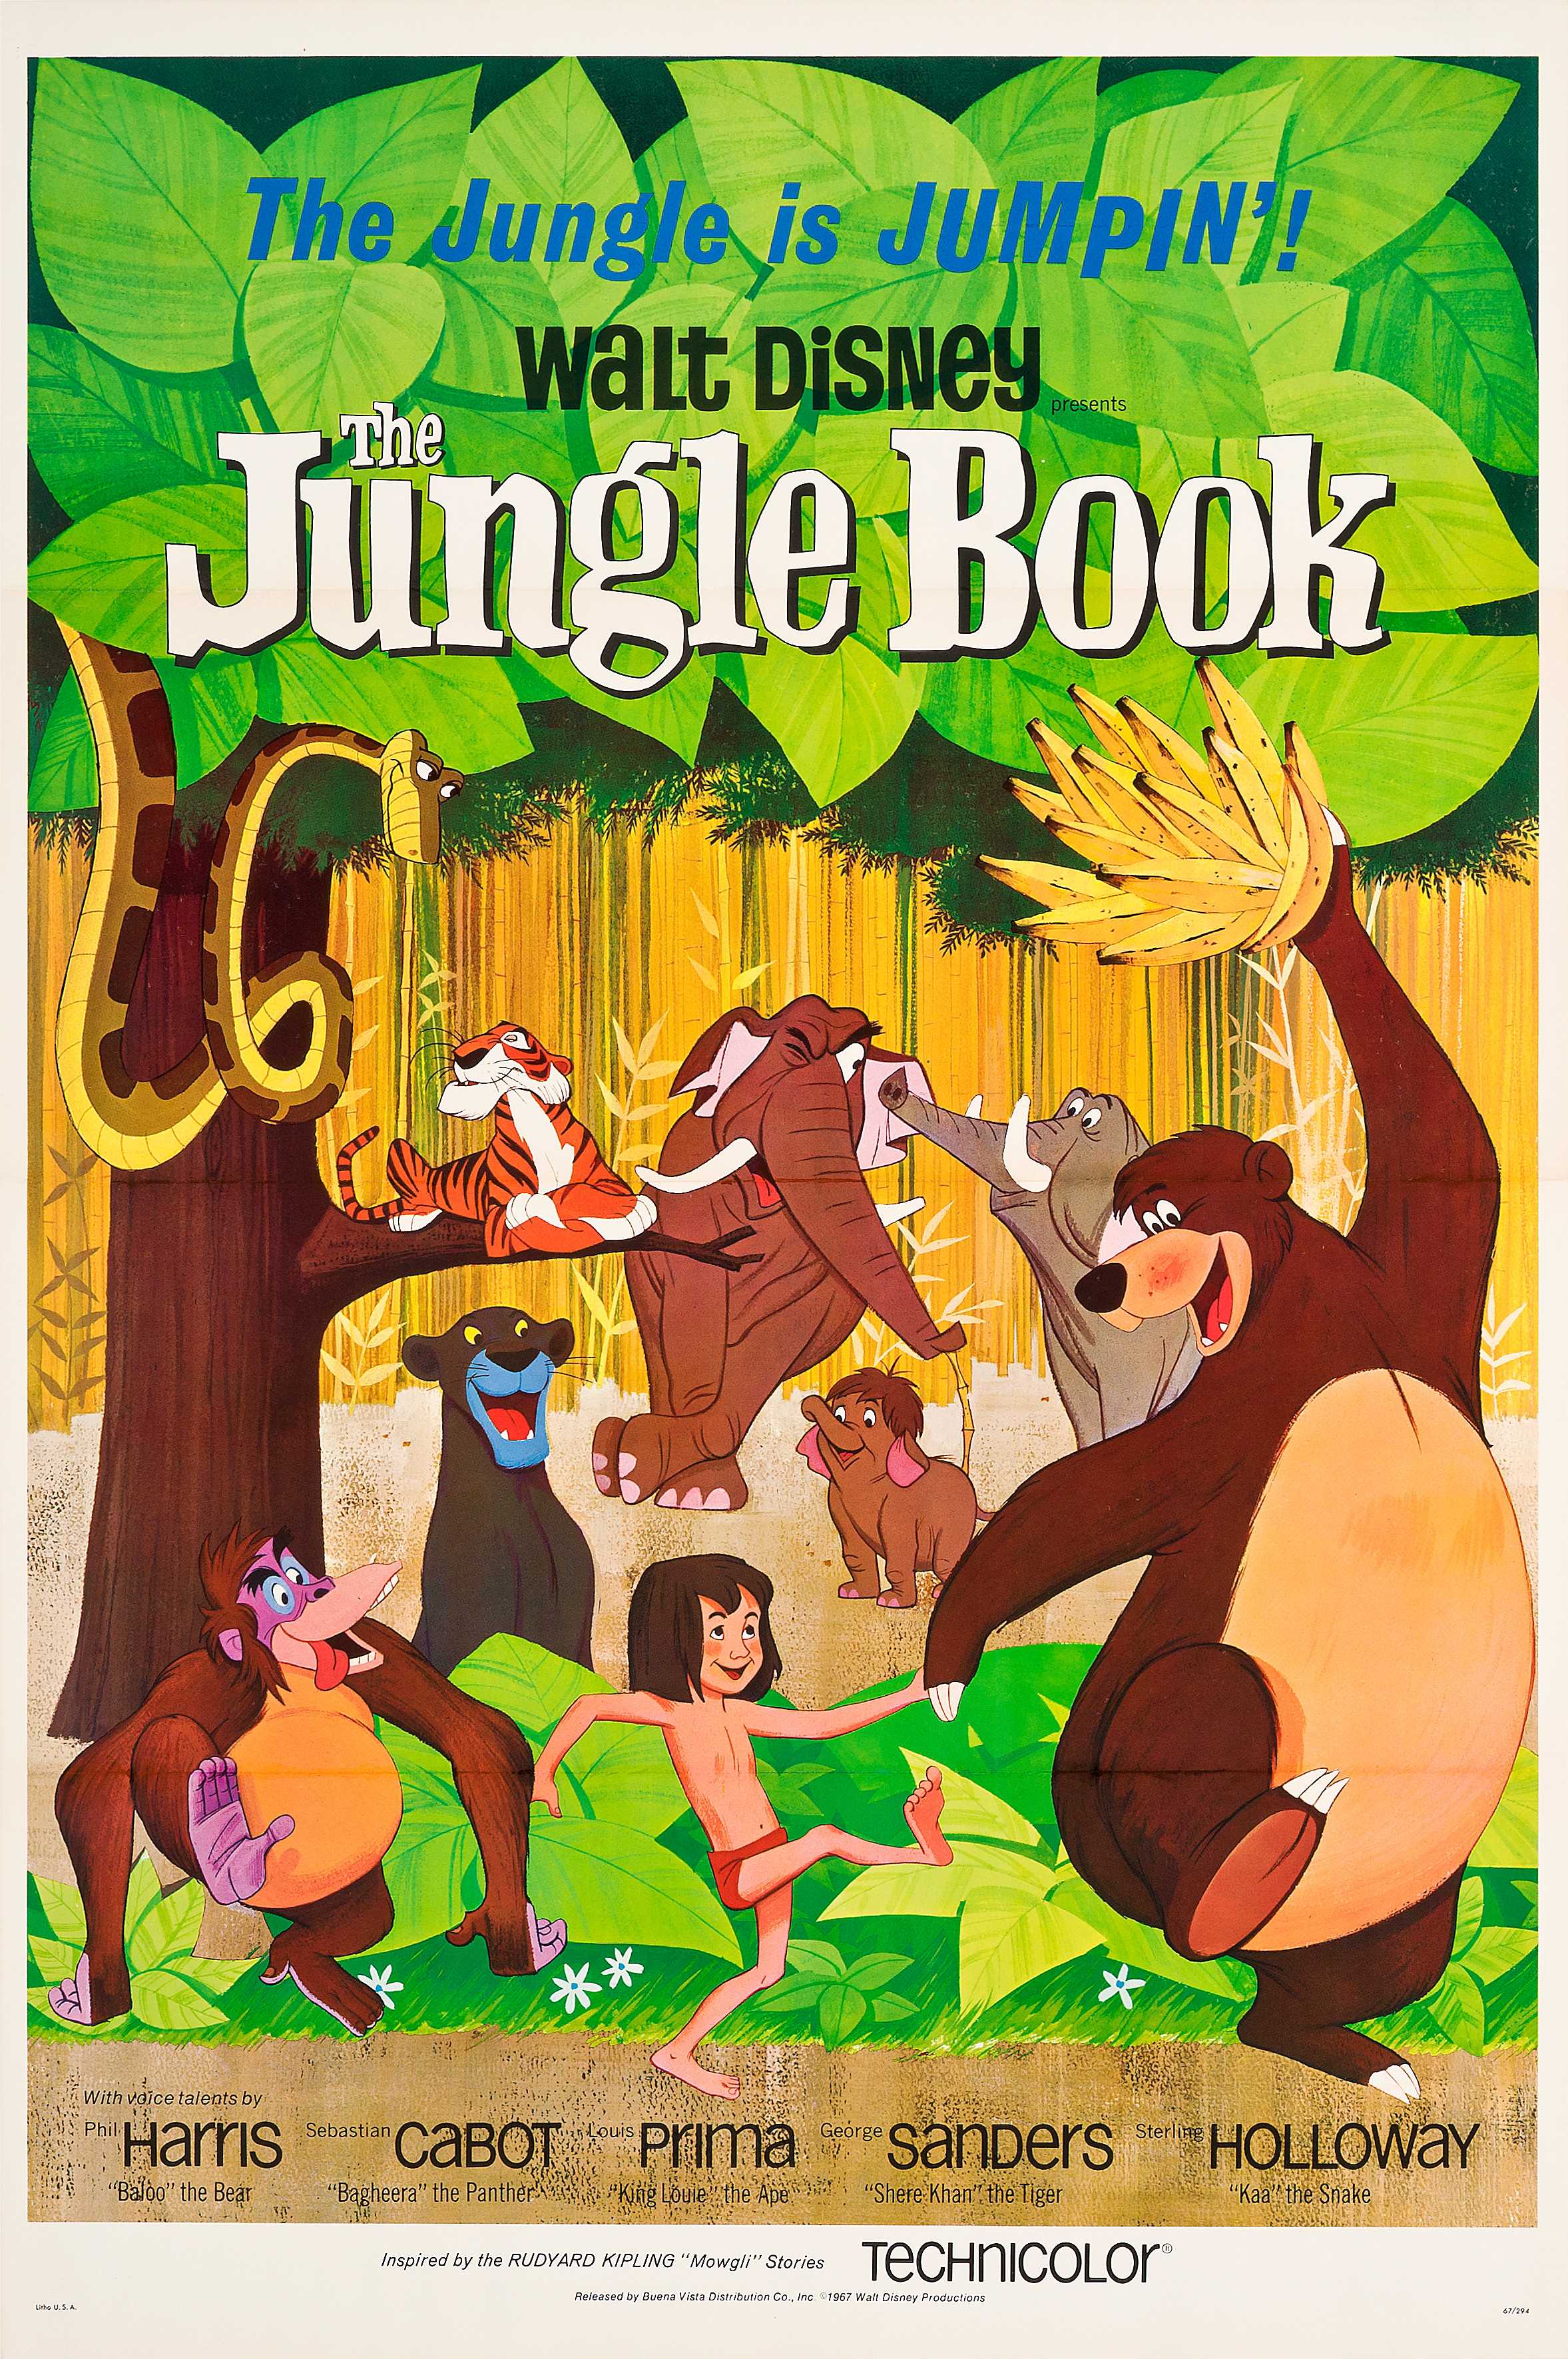 instal the last version for android The Jungle Book